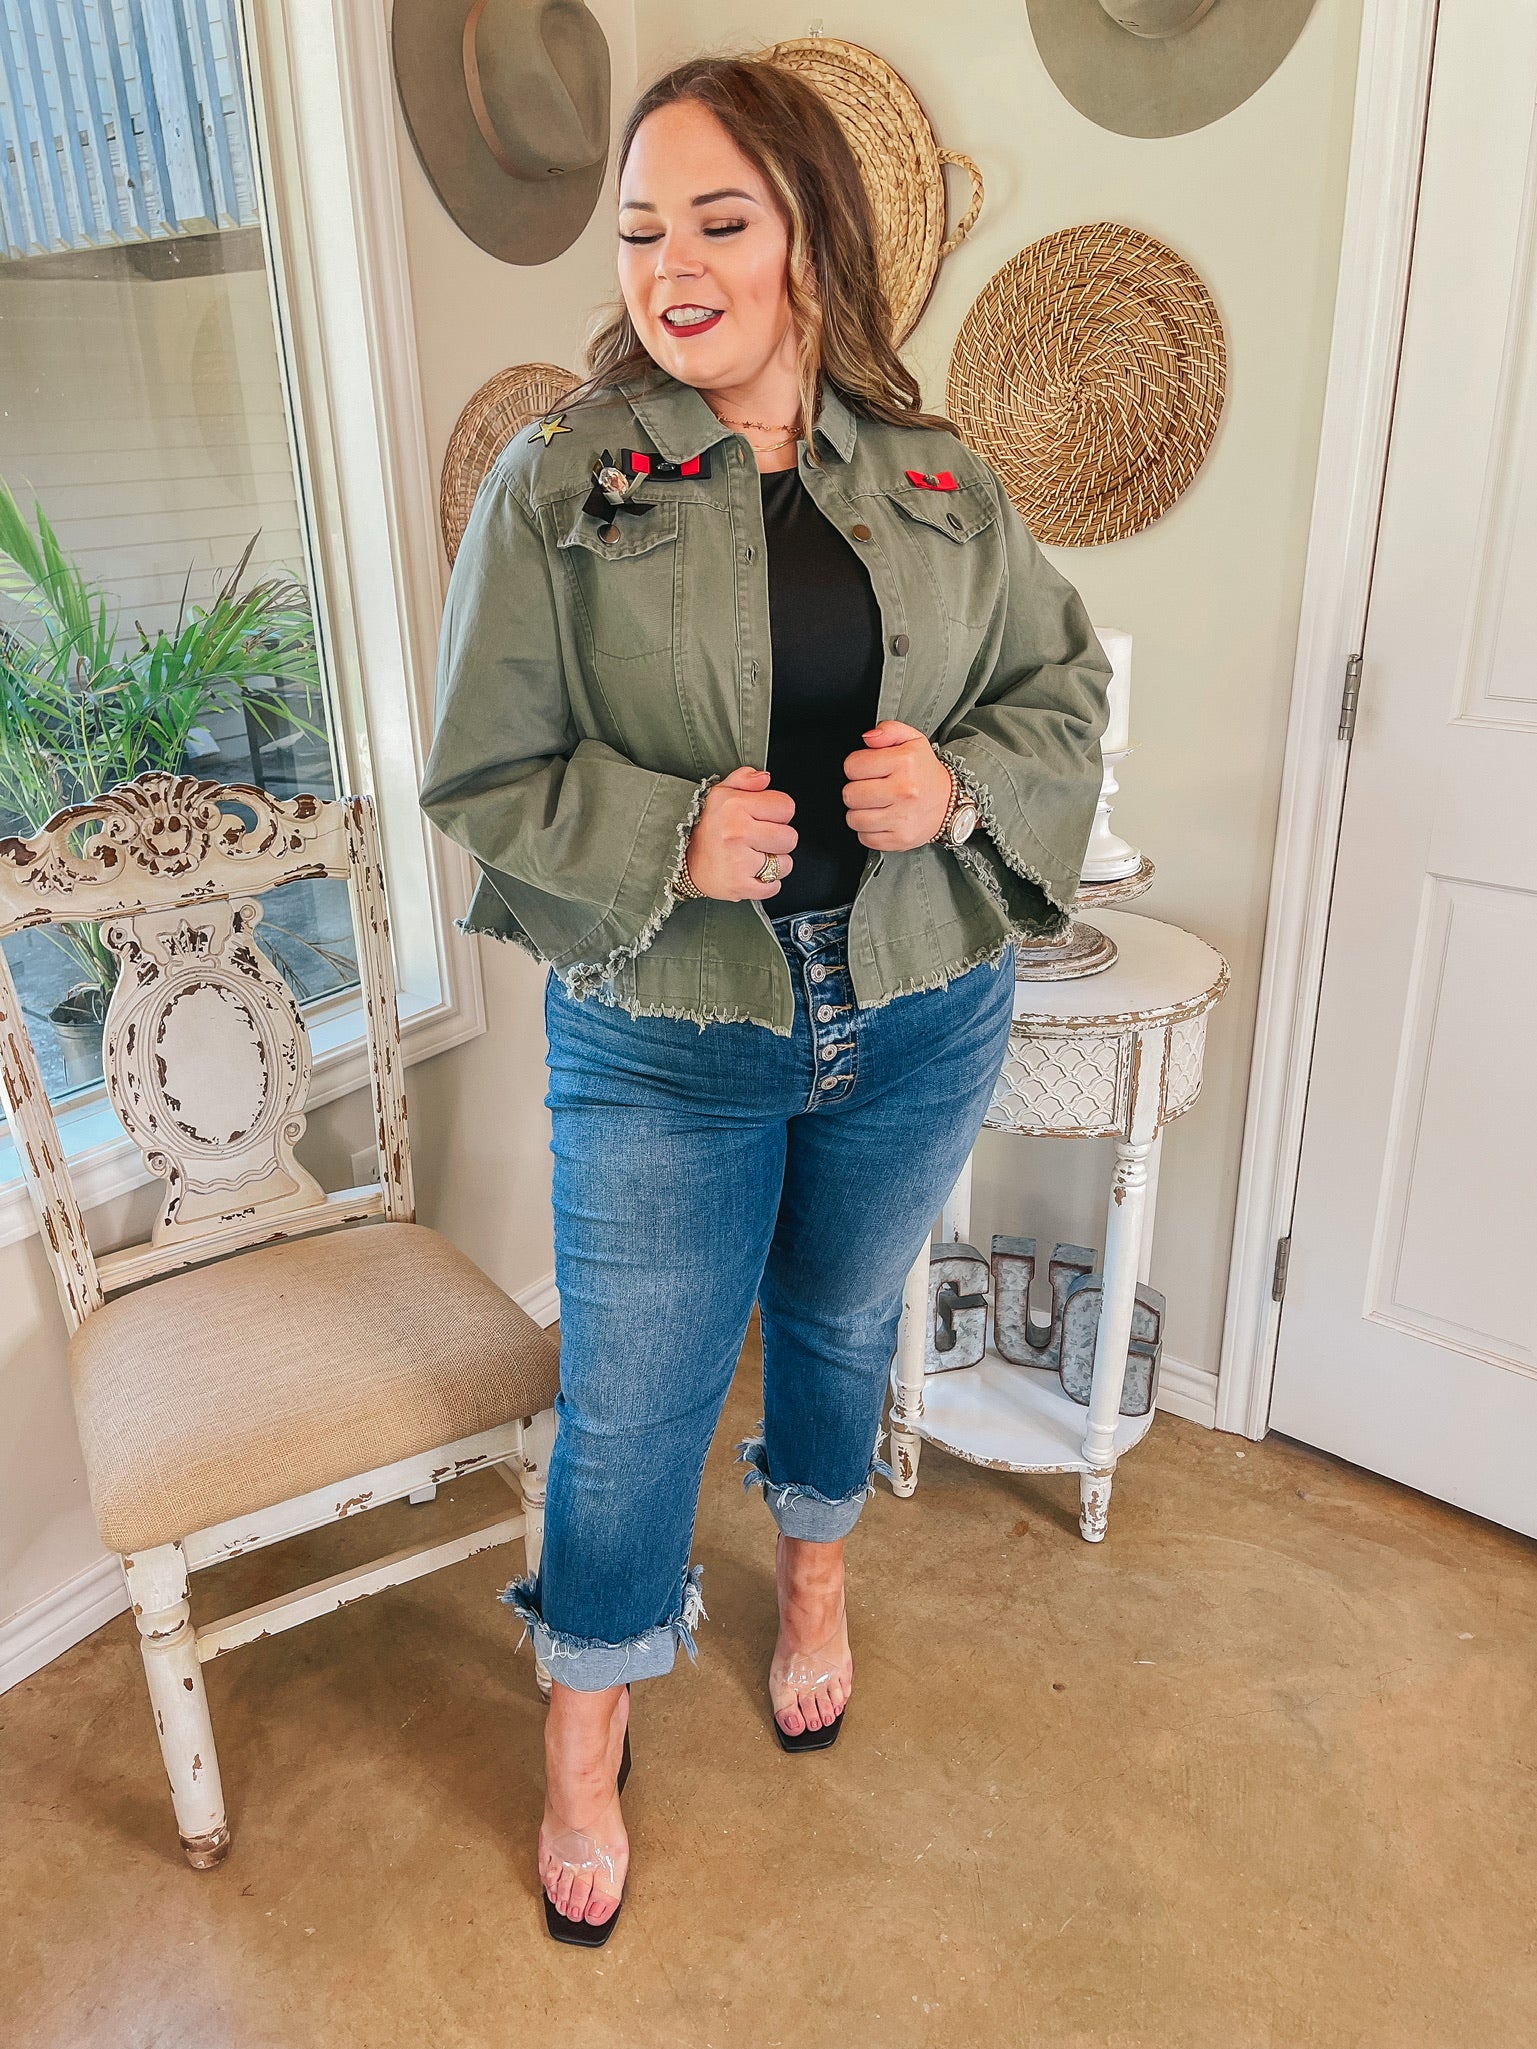 Downtown Denver Flare Sleeve Cropped Jacket with Patches in Olive Green - Giddy Up Glamour Boutique